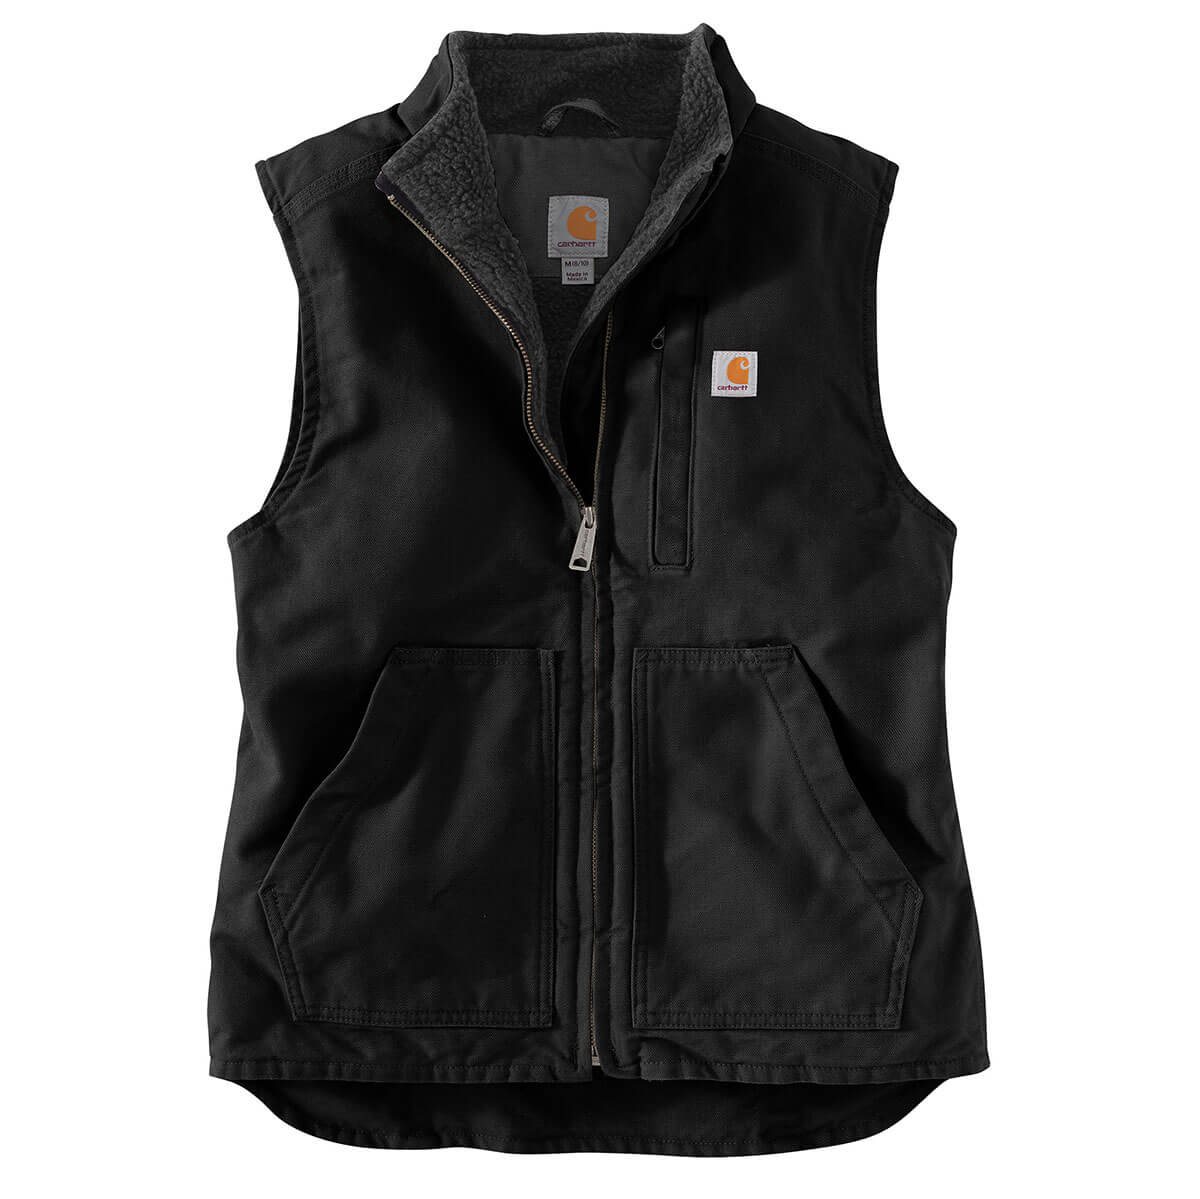 Carhartt Women's Relaxed Fit Washed Duck Sherpa-Lined Mock Neck Vest BLK Black